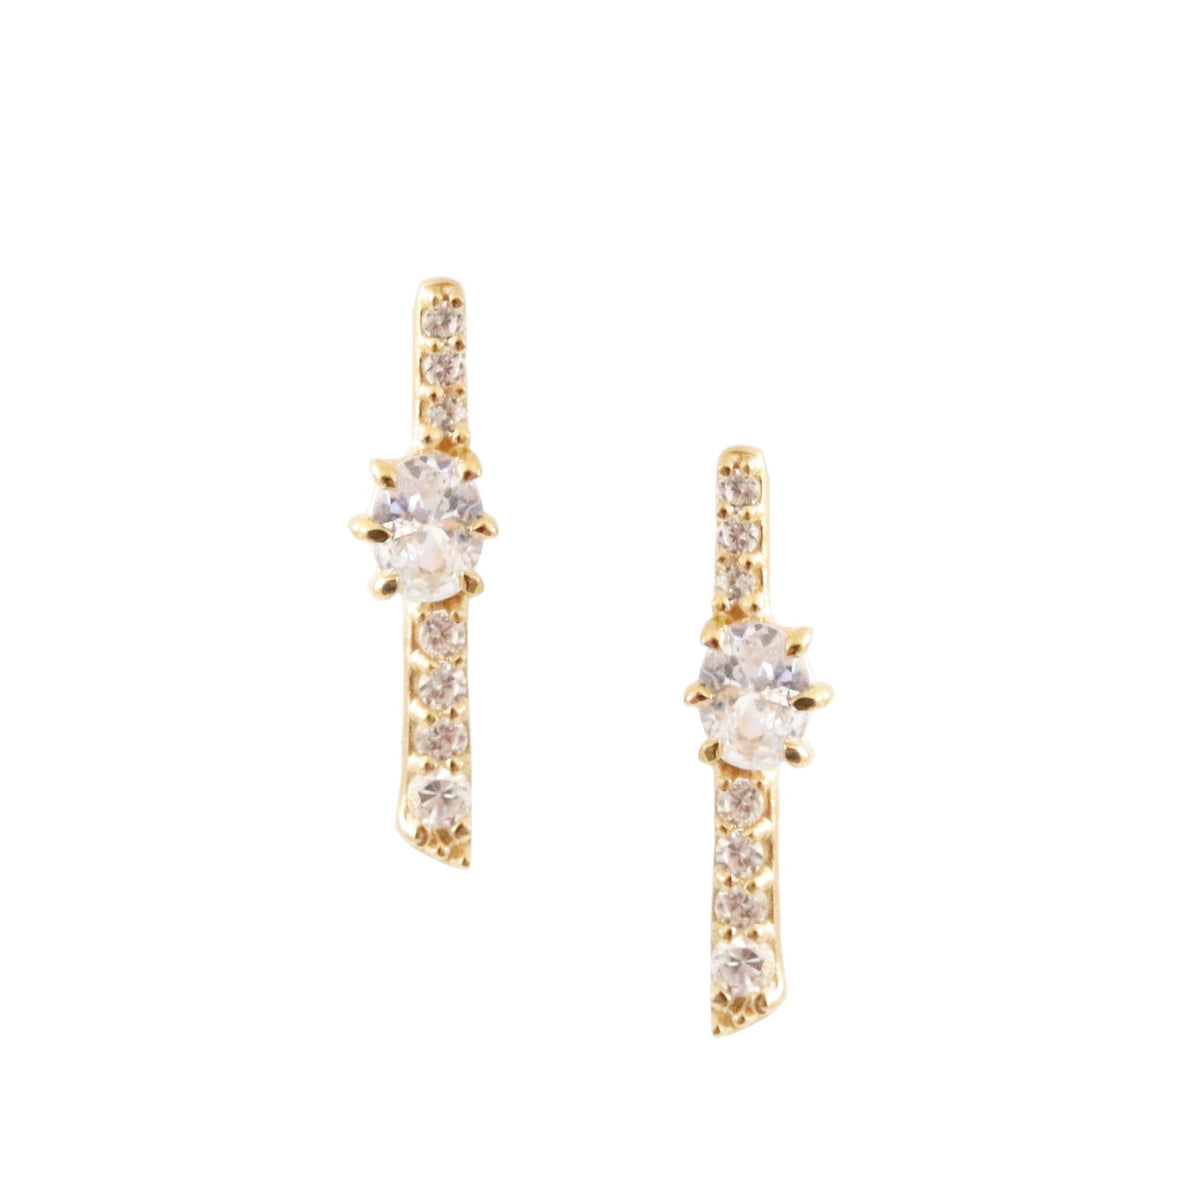 DAINTY KIND OVAL BAR STUDS - CUBIC ZIRCONIA &amp; GOLD - SO PRETTY CARA COTTER